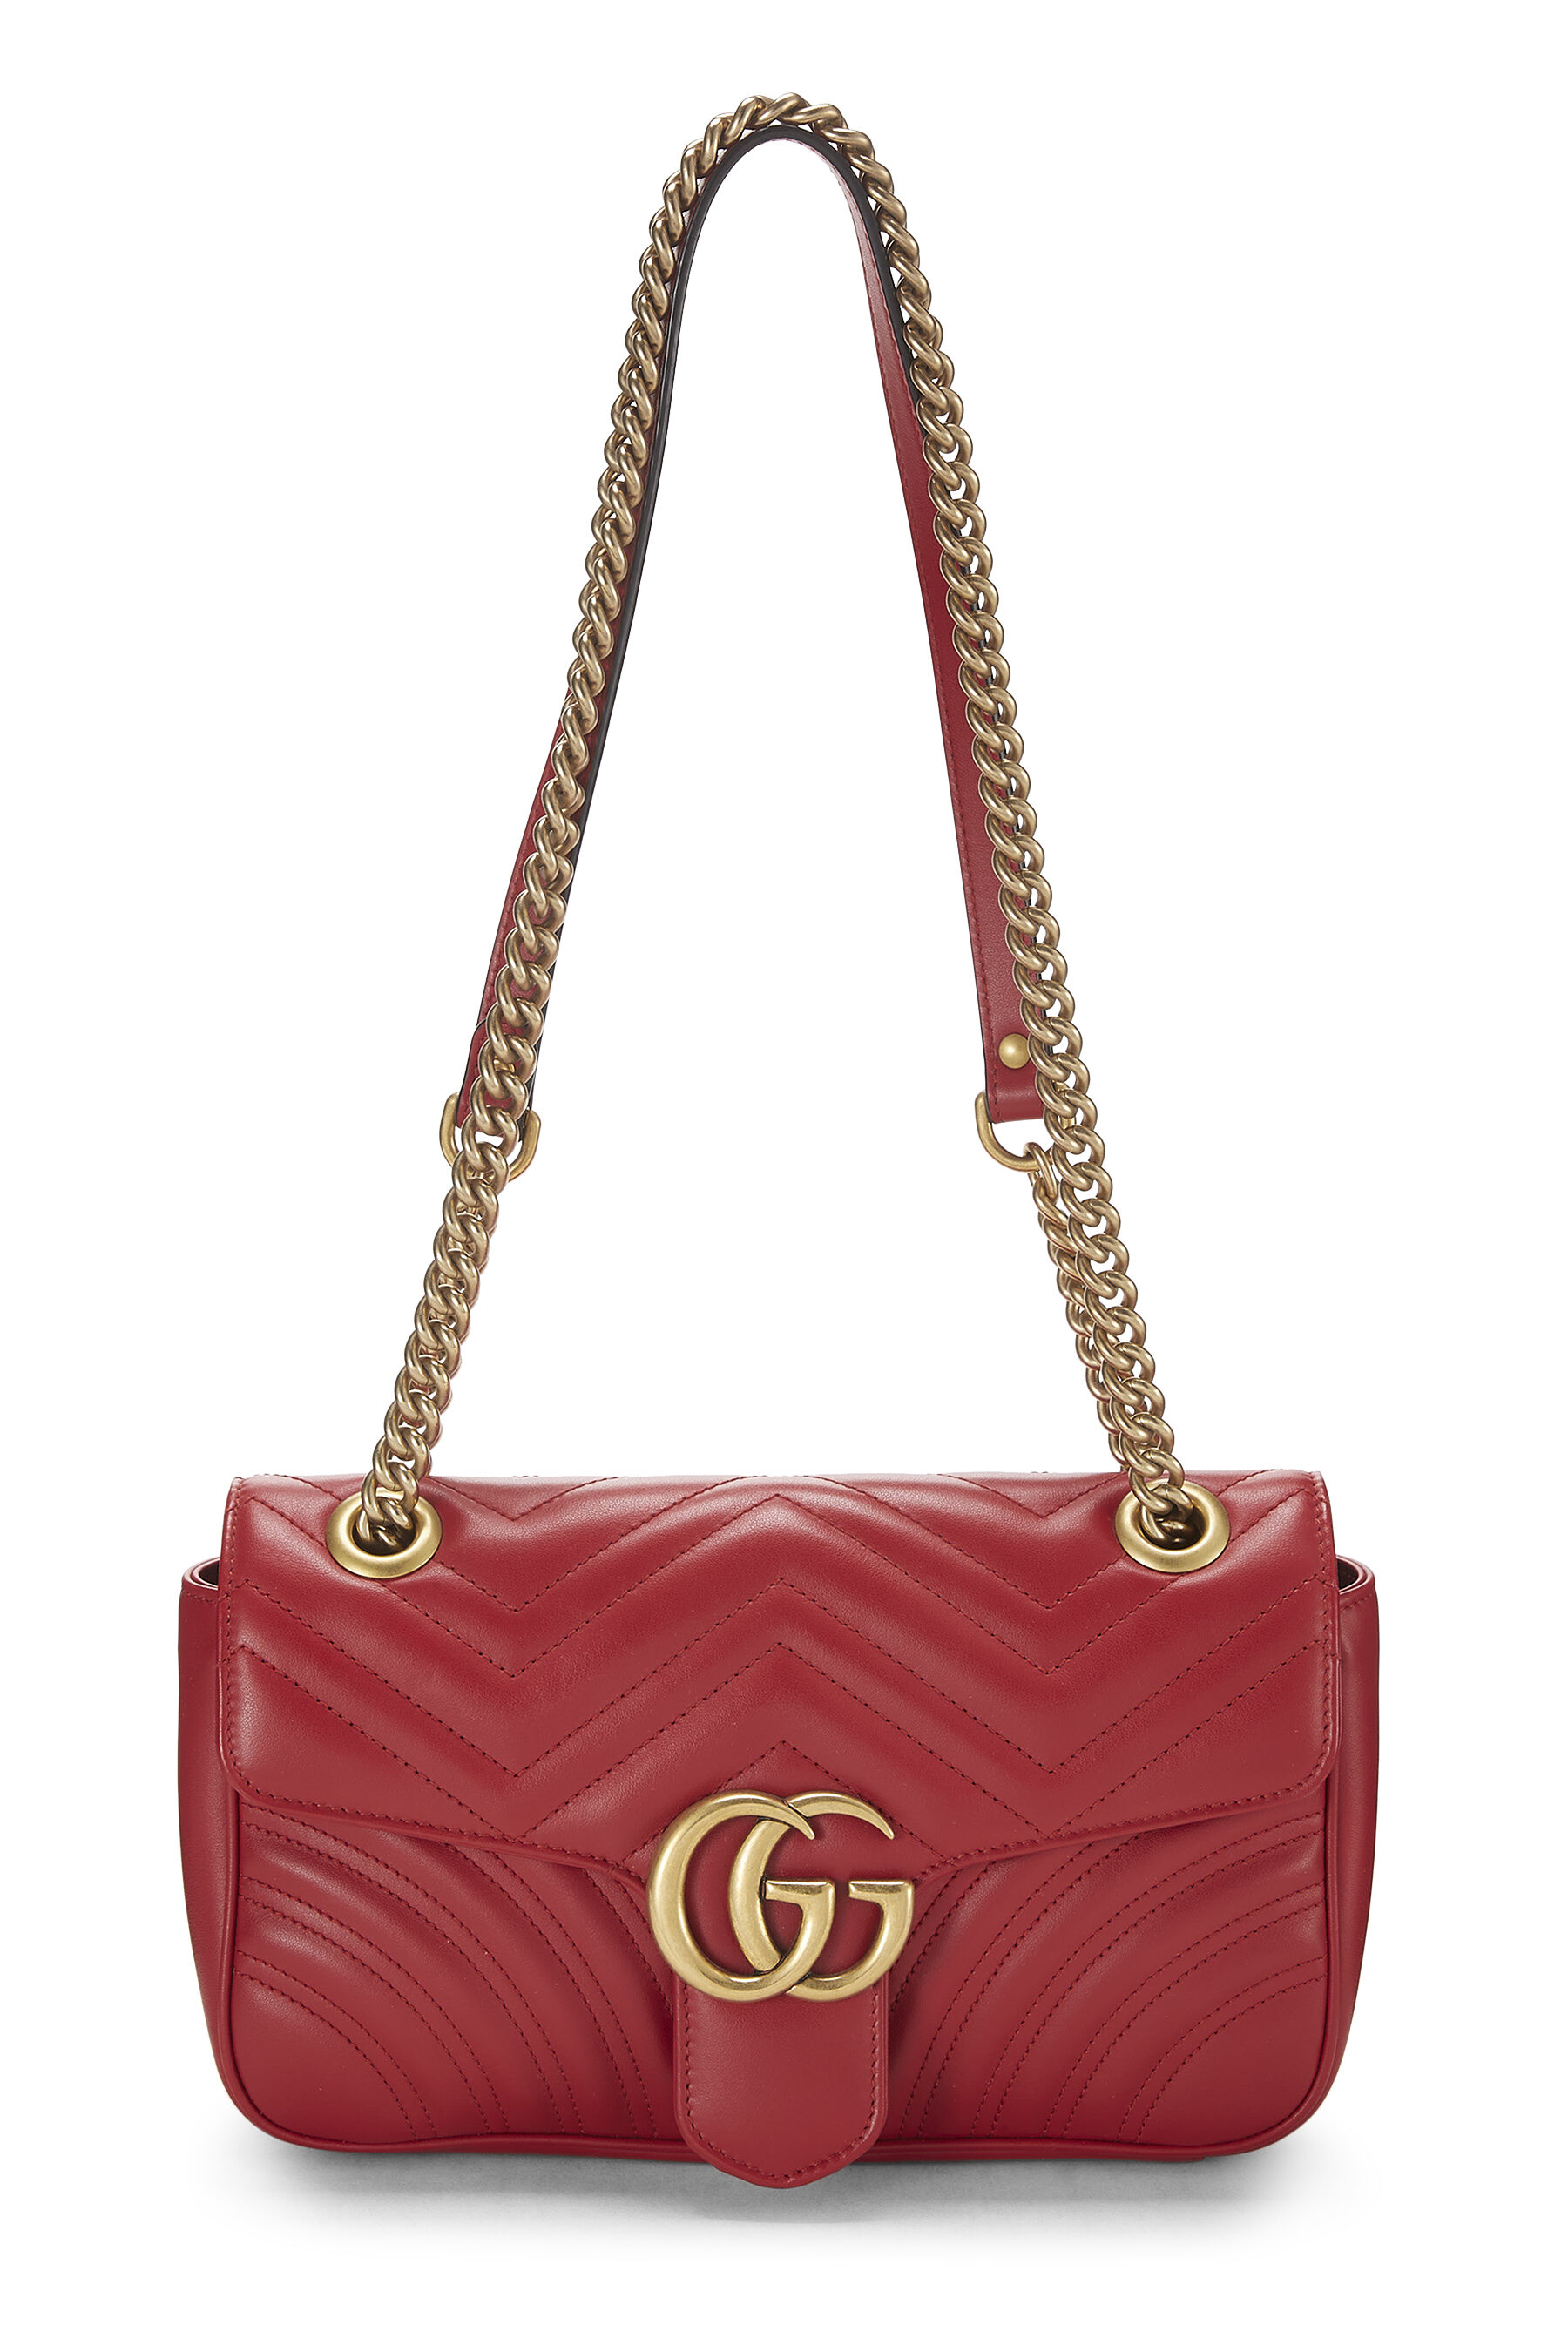 Red Leather GG Marmont Matelassé Shoulder Bag Small